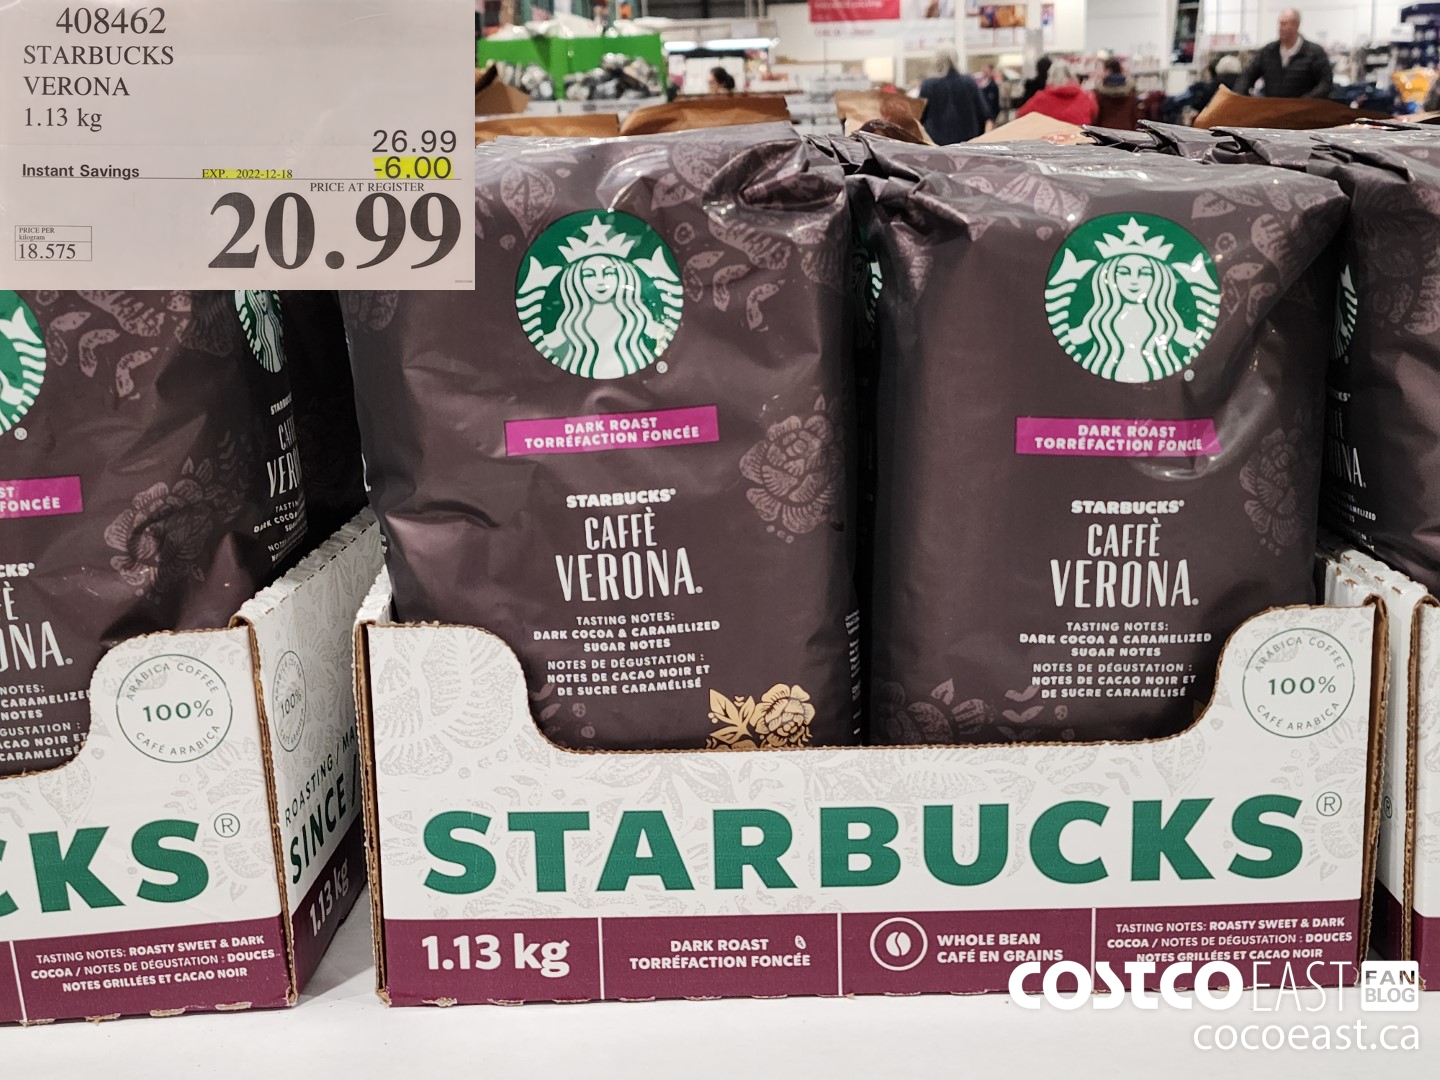 French Roast Starbucks Coffee Beans Review - Costco West Fan Blog